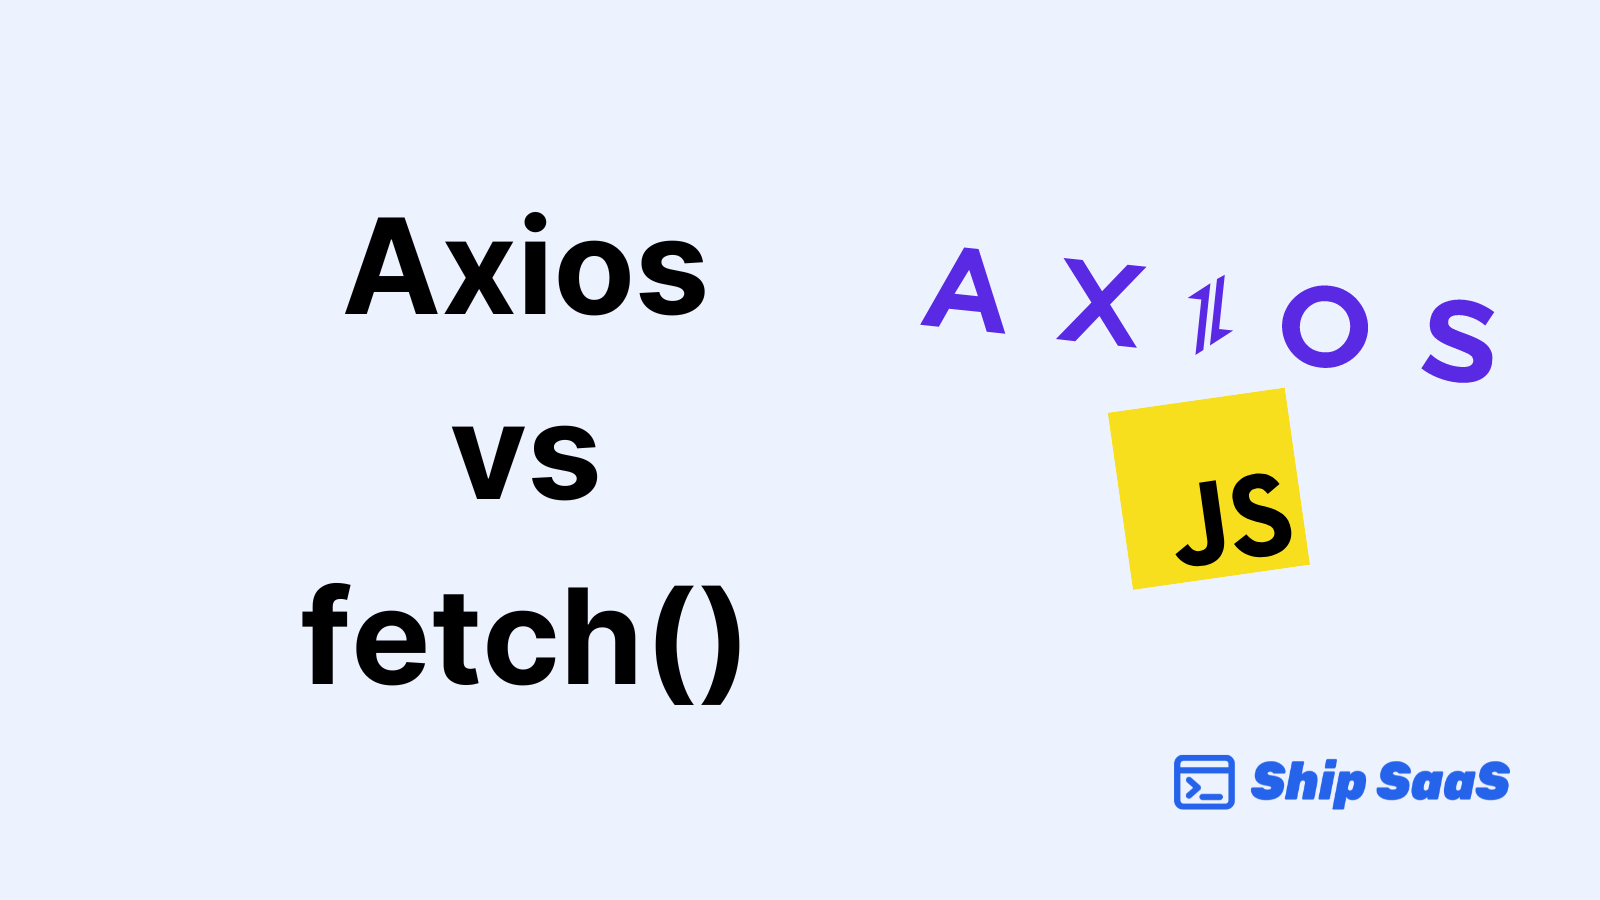 Axios vs fetch - which one is right for you?